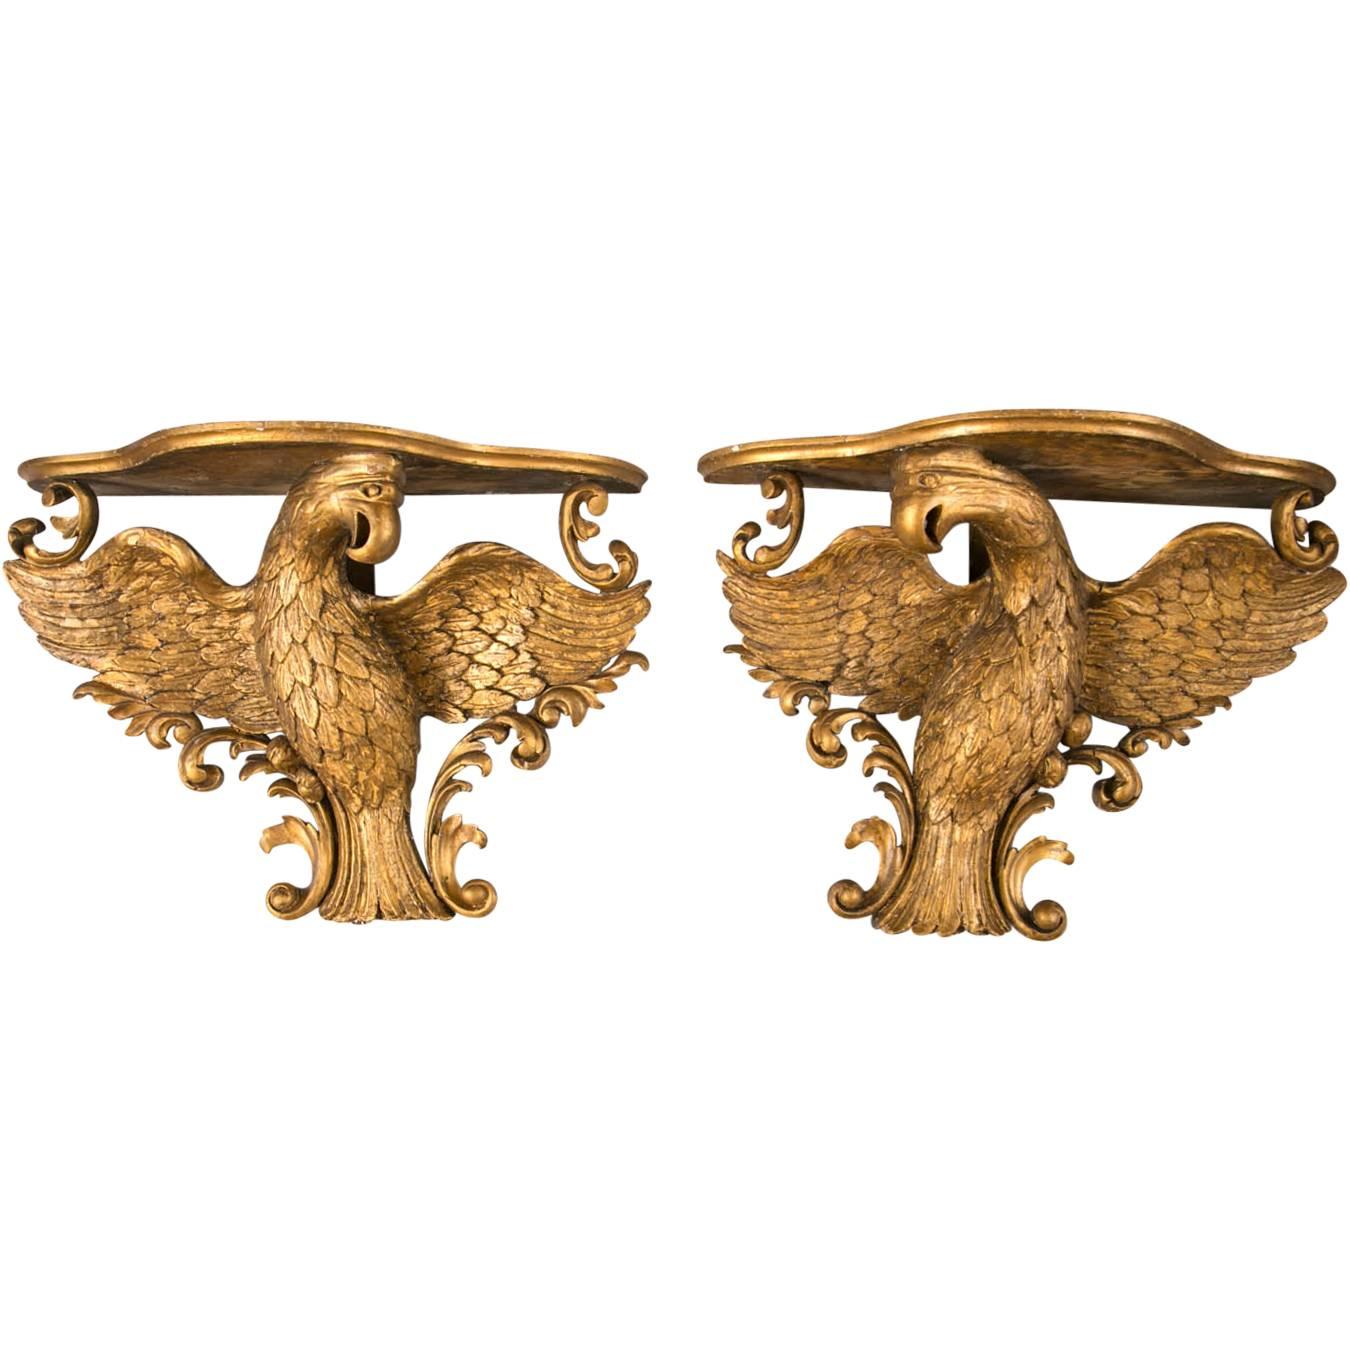 Pair of 19th Century Gilt-Gesso Eagle-Form Wall Brackets For Sale